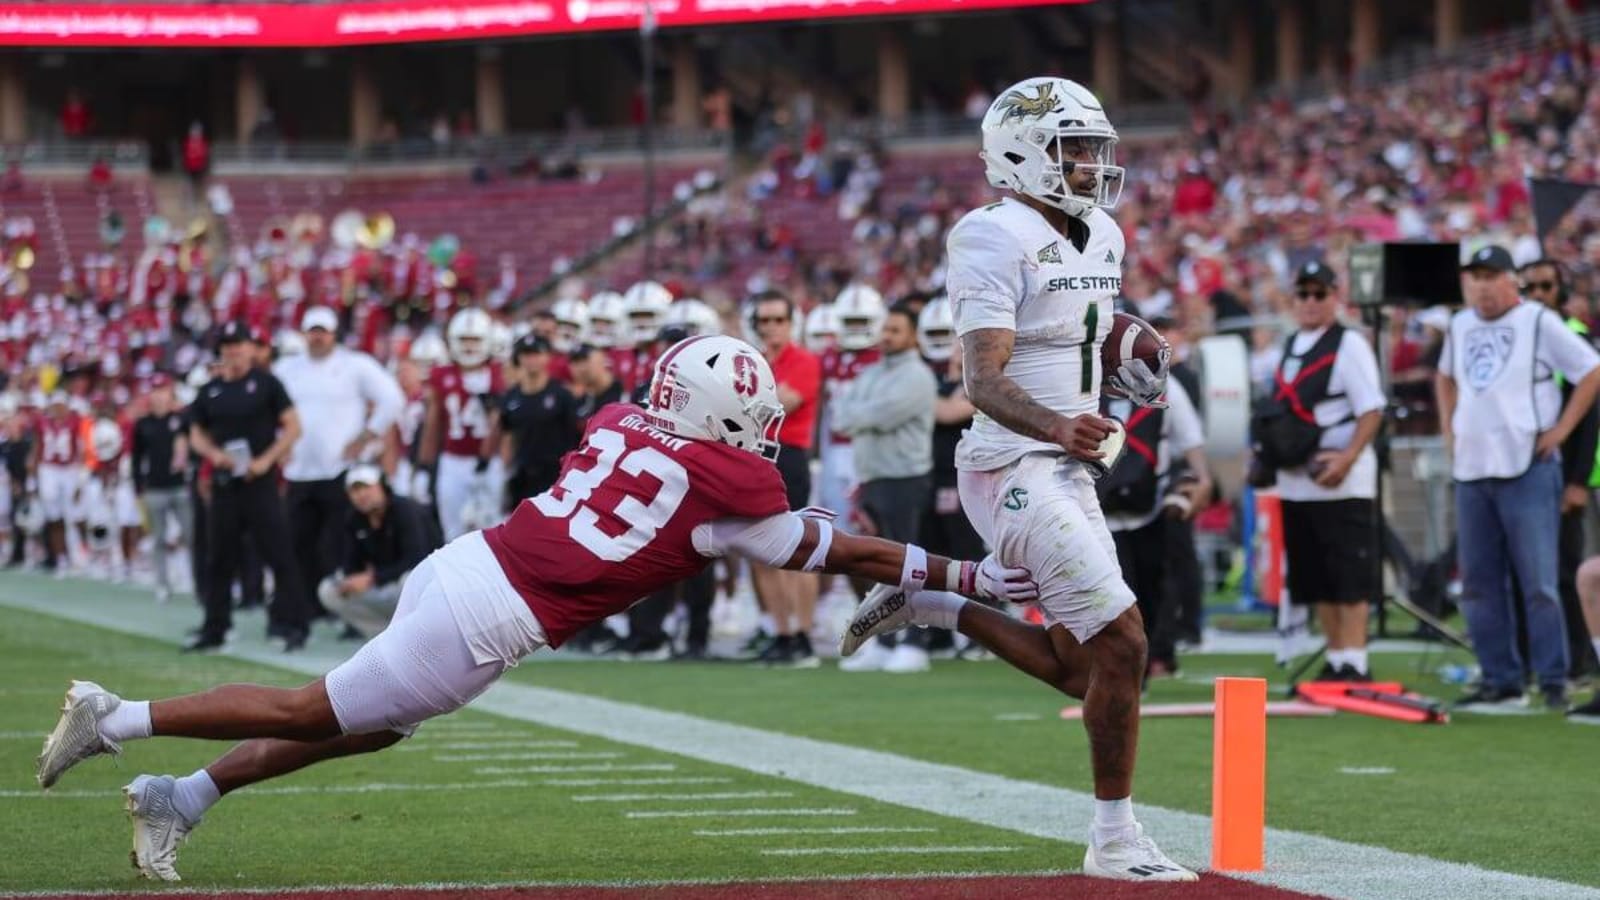 Troy Taylor and Stanford fall to the monster he built in Sacramento State